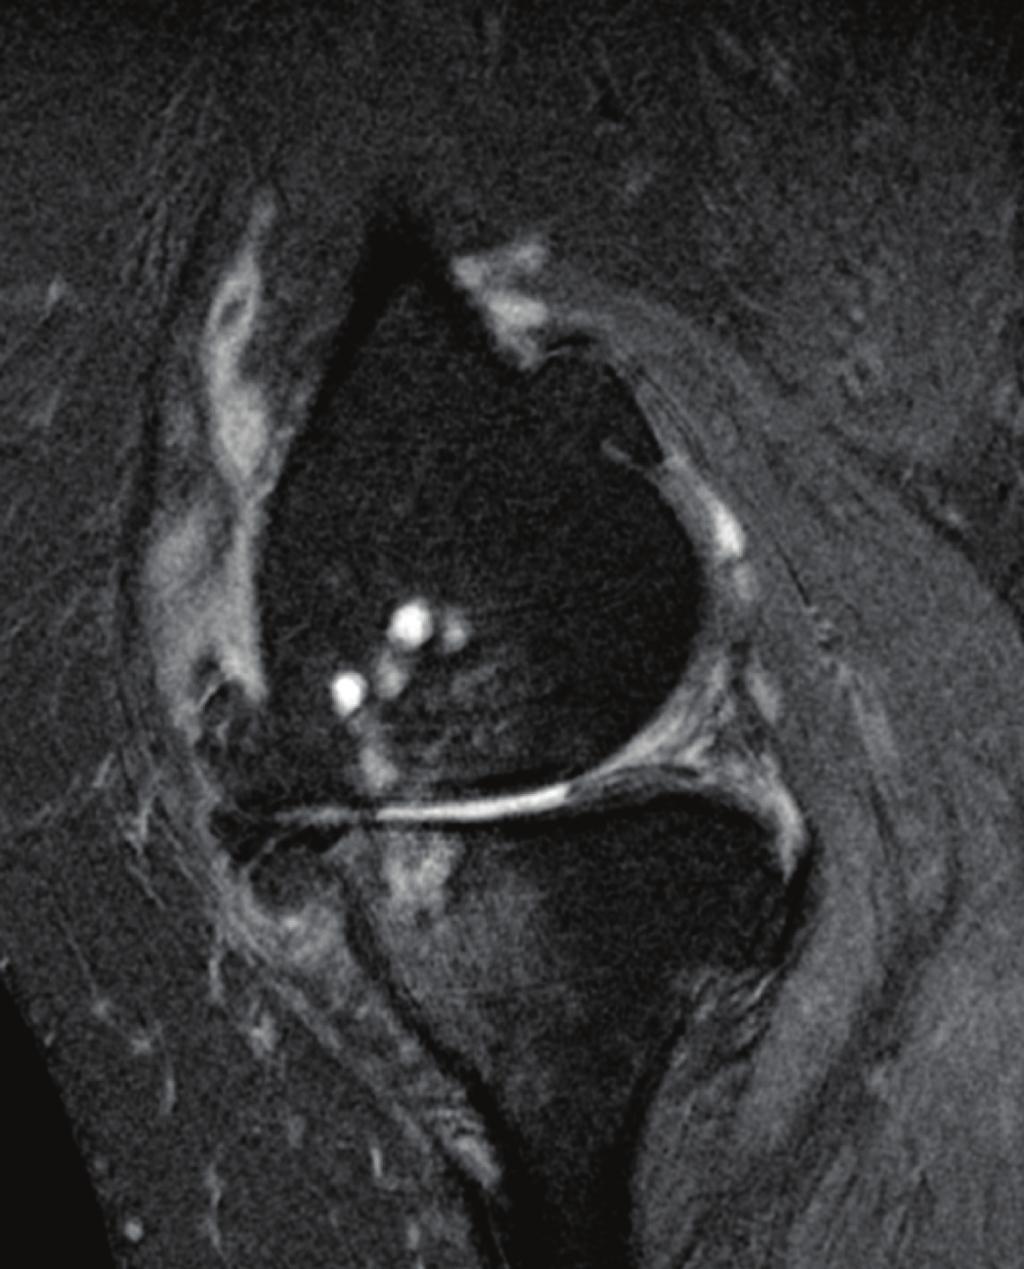 (b) Corresponding proton density weighted fat suppressed sagittal MRI sequence showing the large anteromedial BML (green arrow).